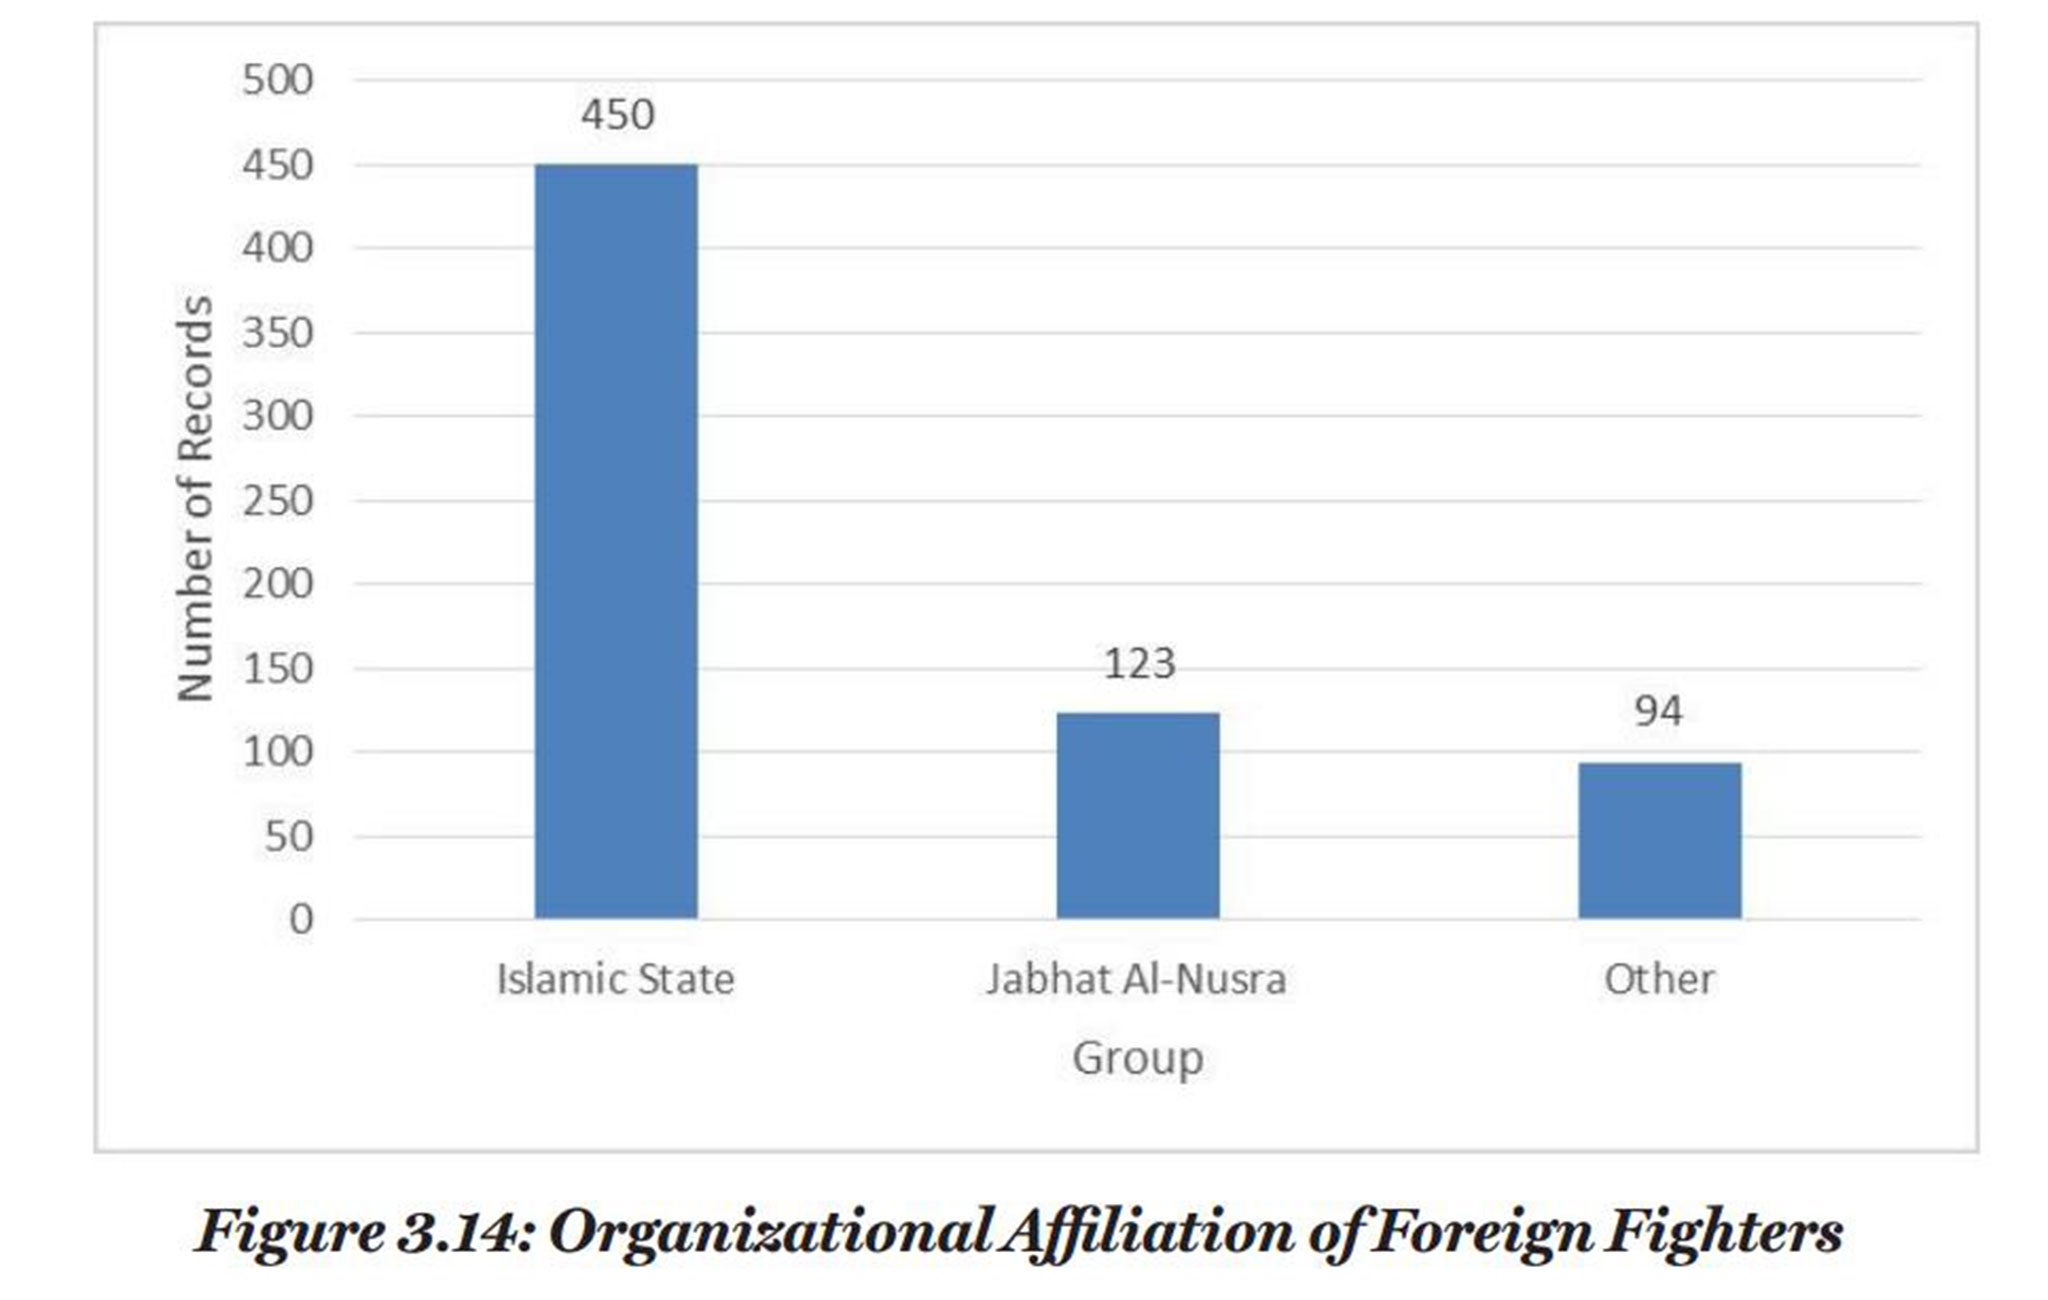 Western foreign fighters studied by the CTC by group